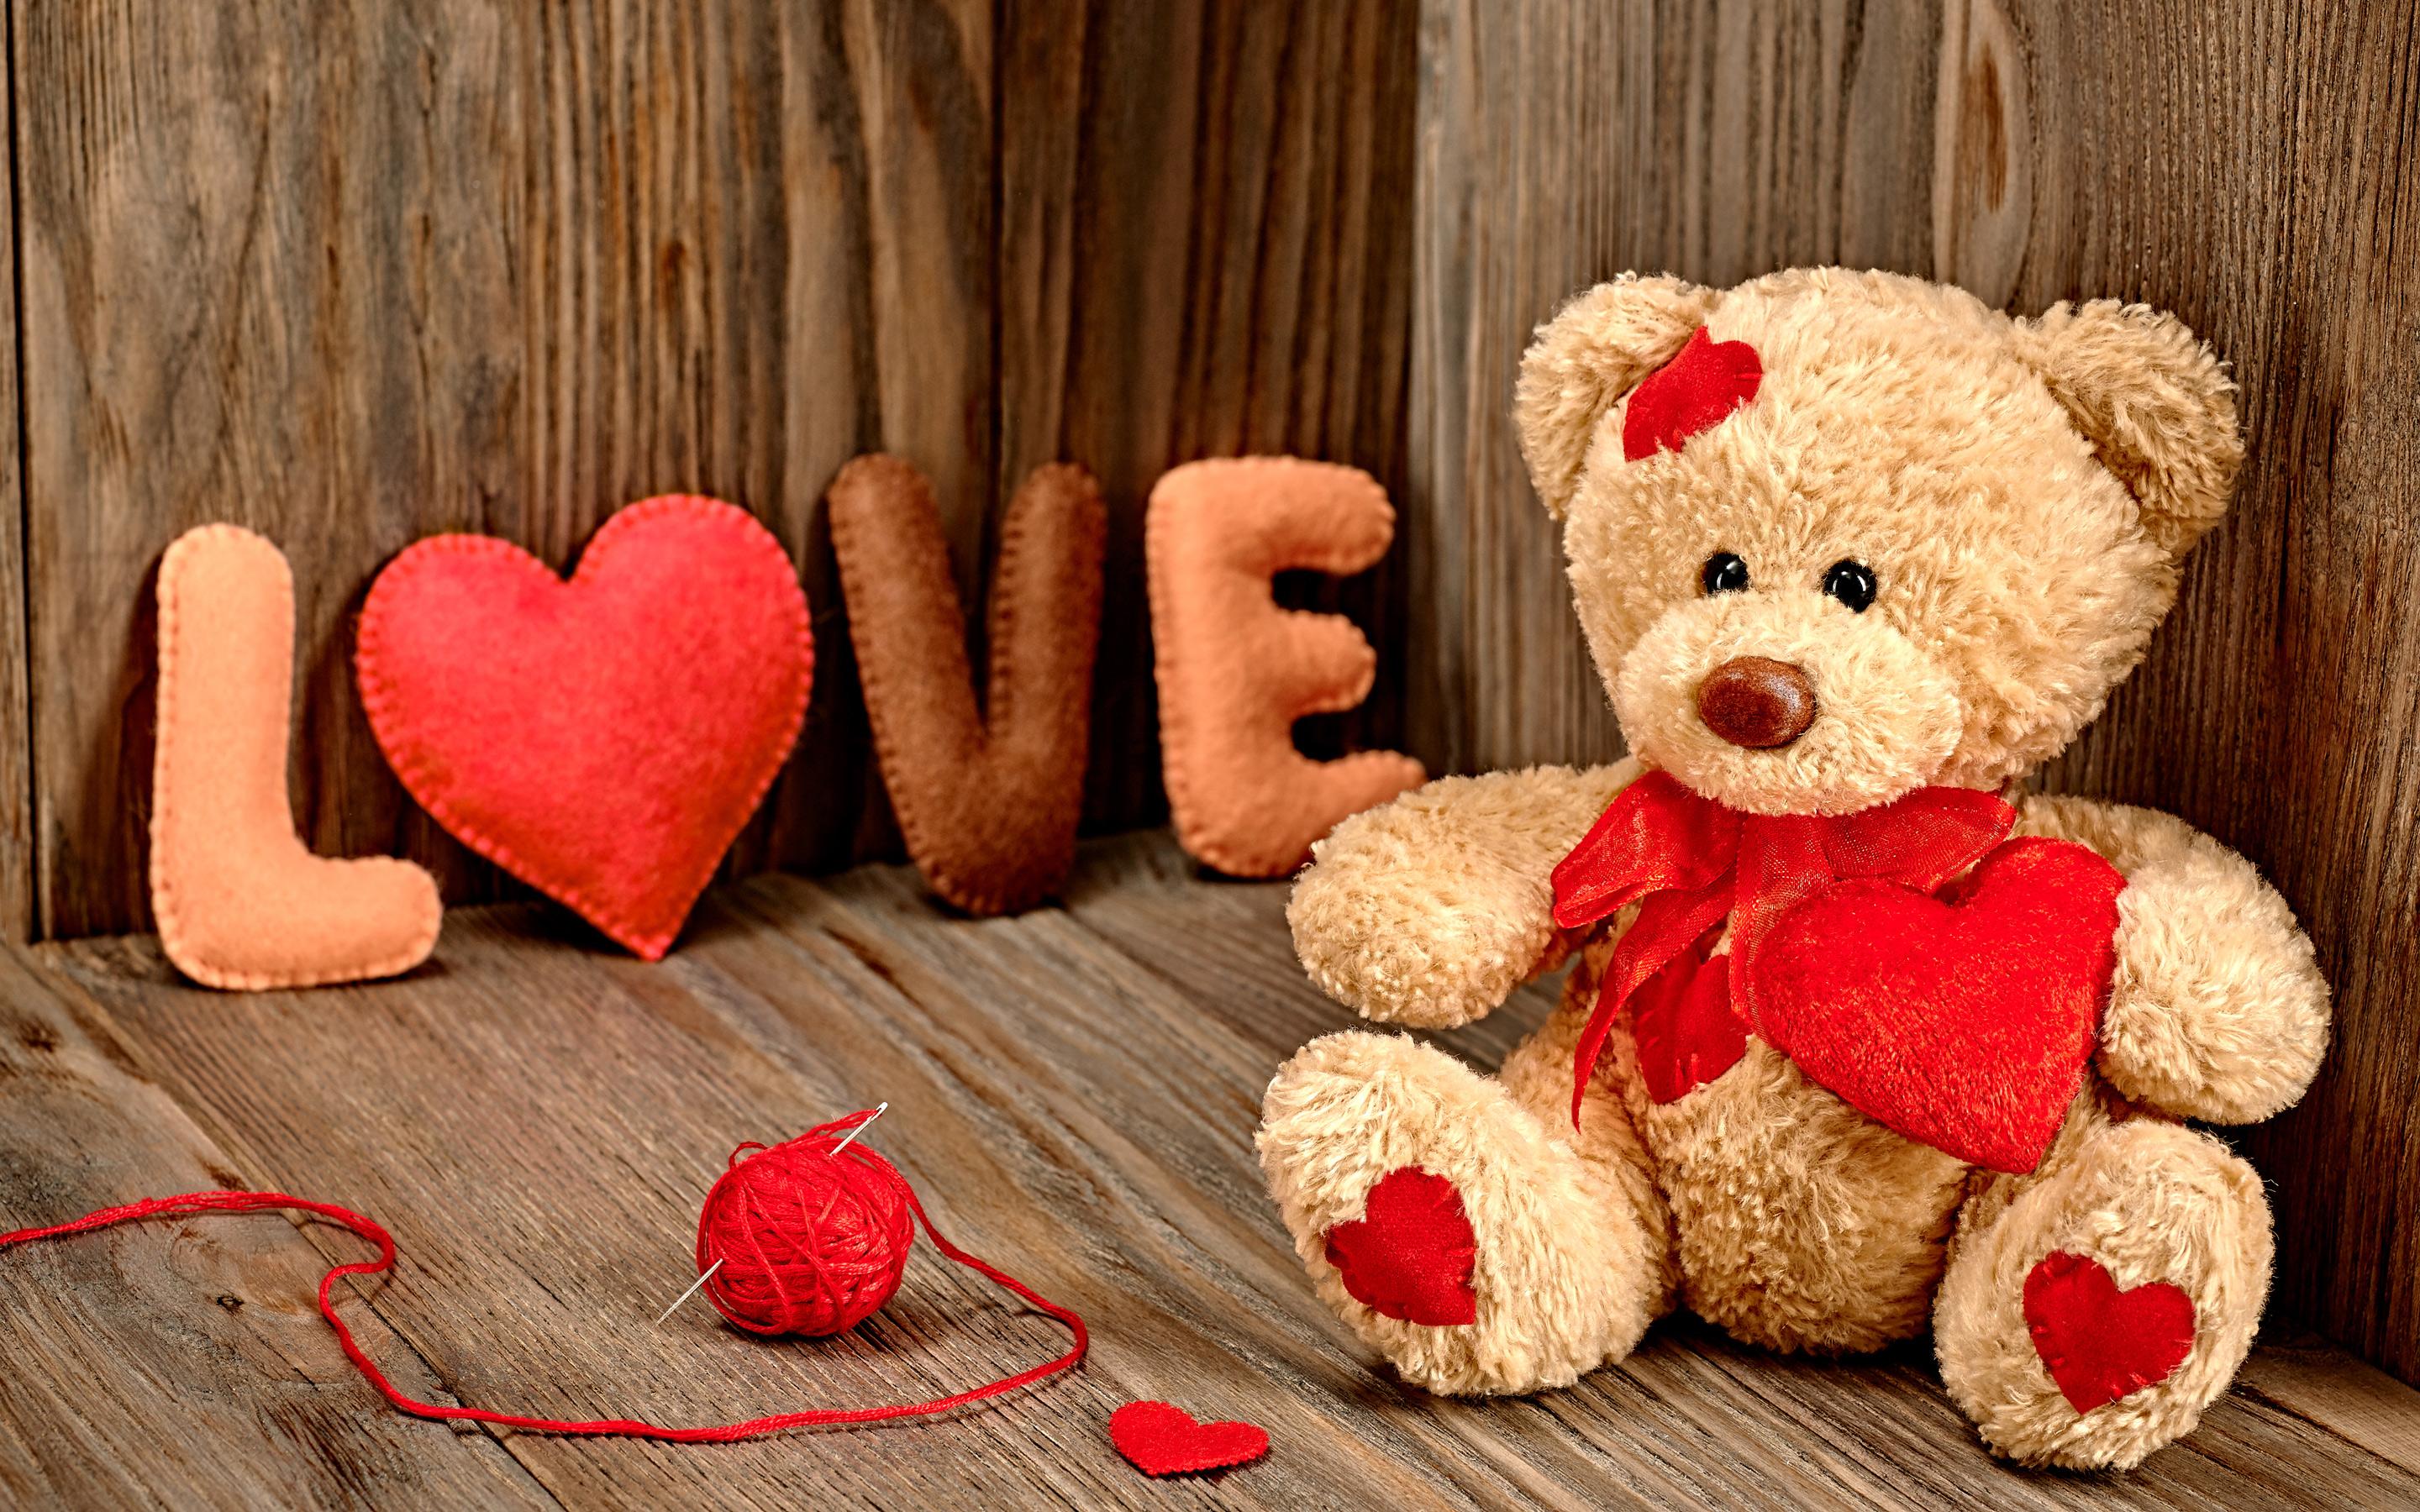 Download Teddy day hd wallpaper - Teddy bear day images for your mobile  cell phone